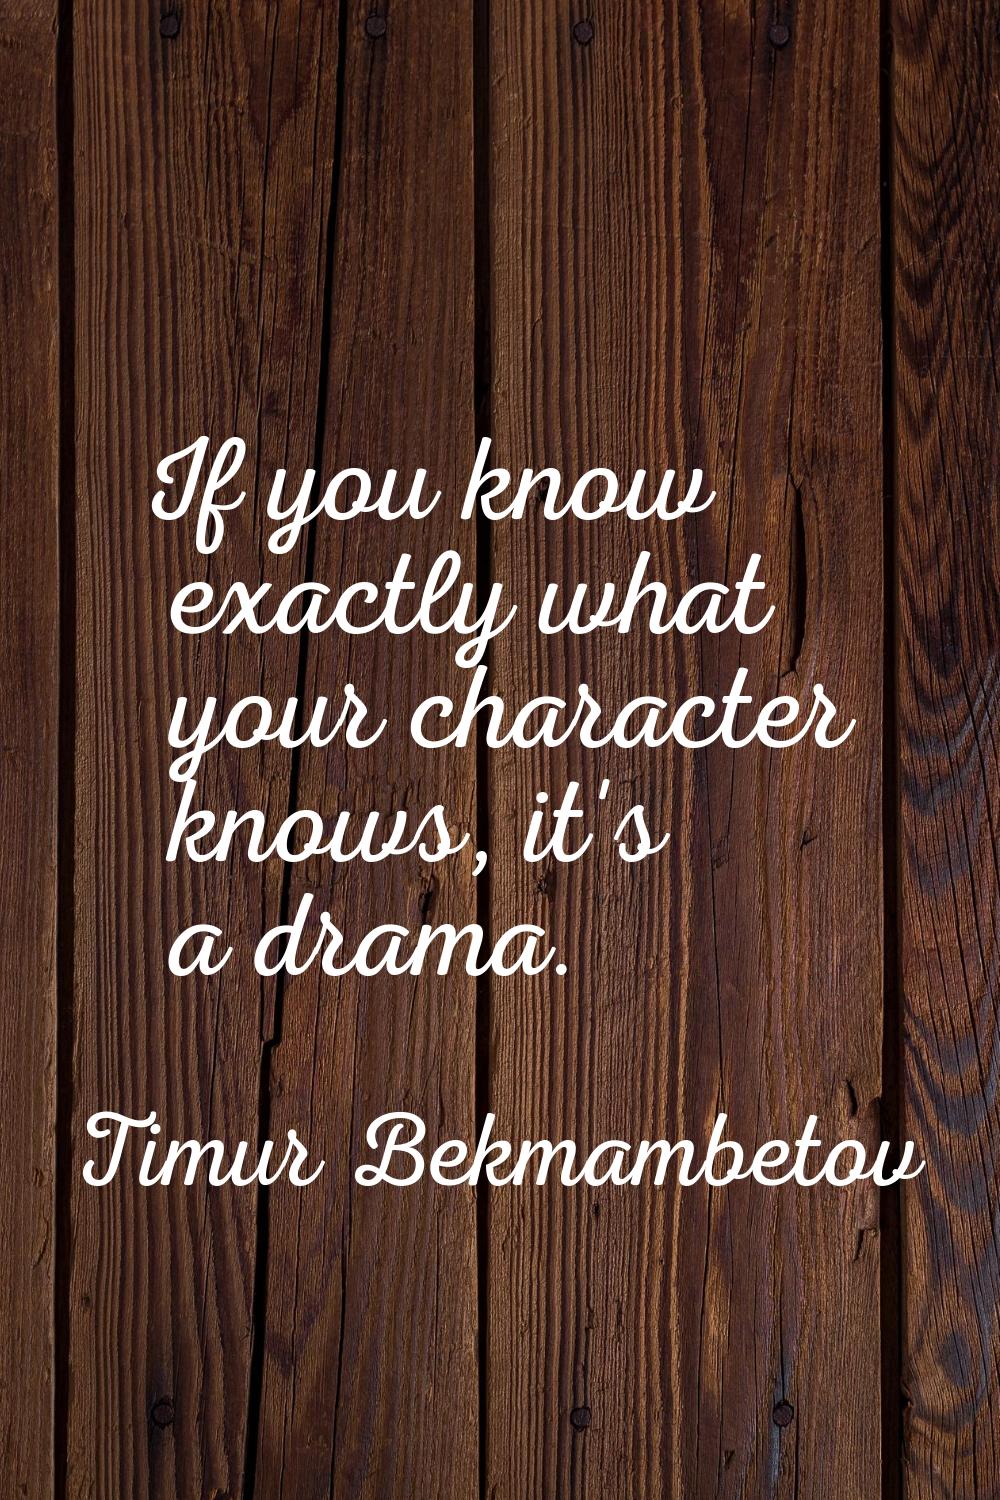 If you know exactly what your character knows, it's a drama.